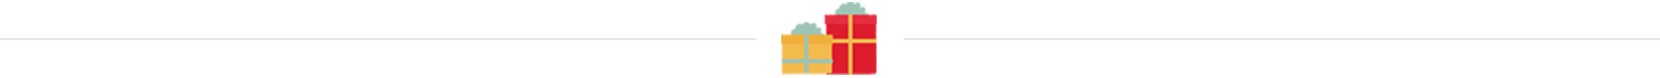 Illustration of wrapped gifts.